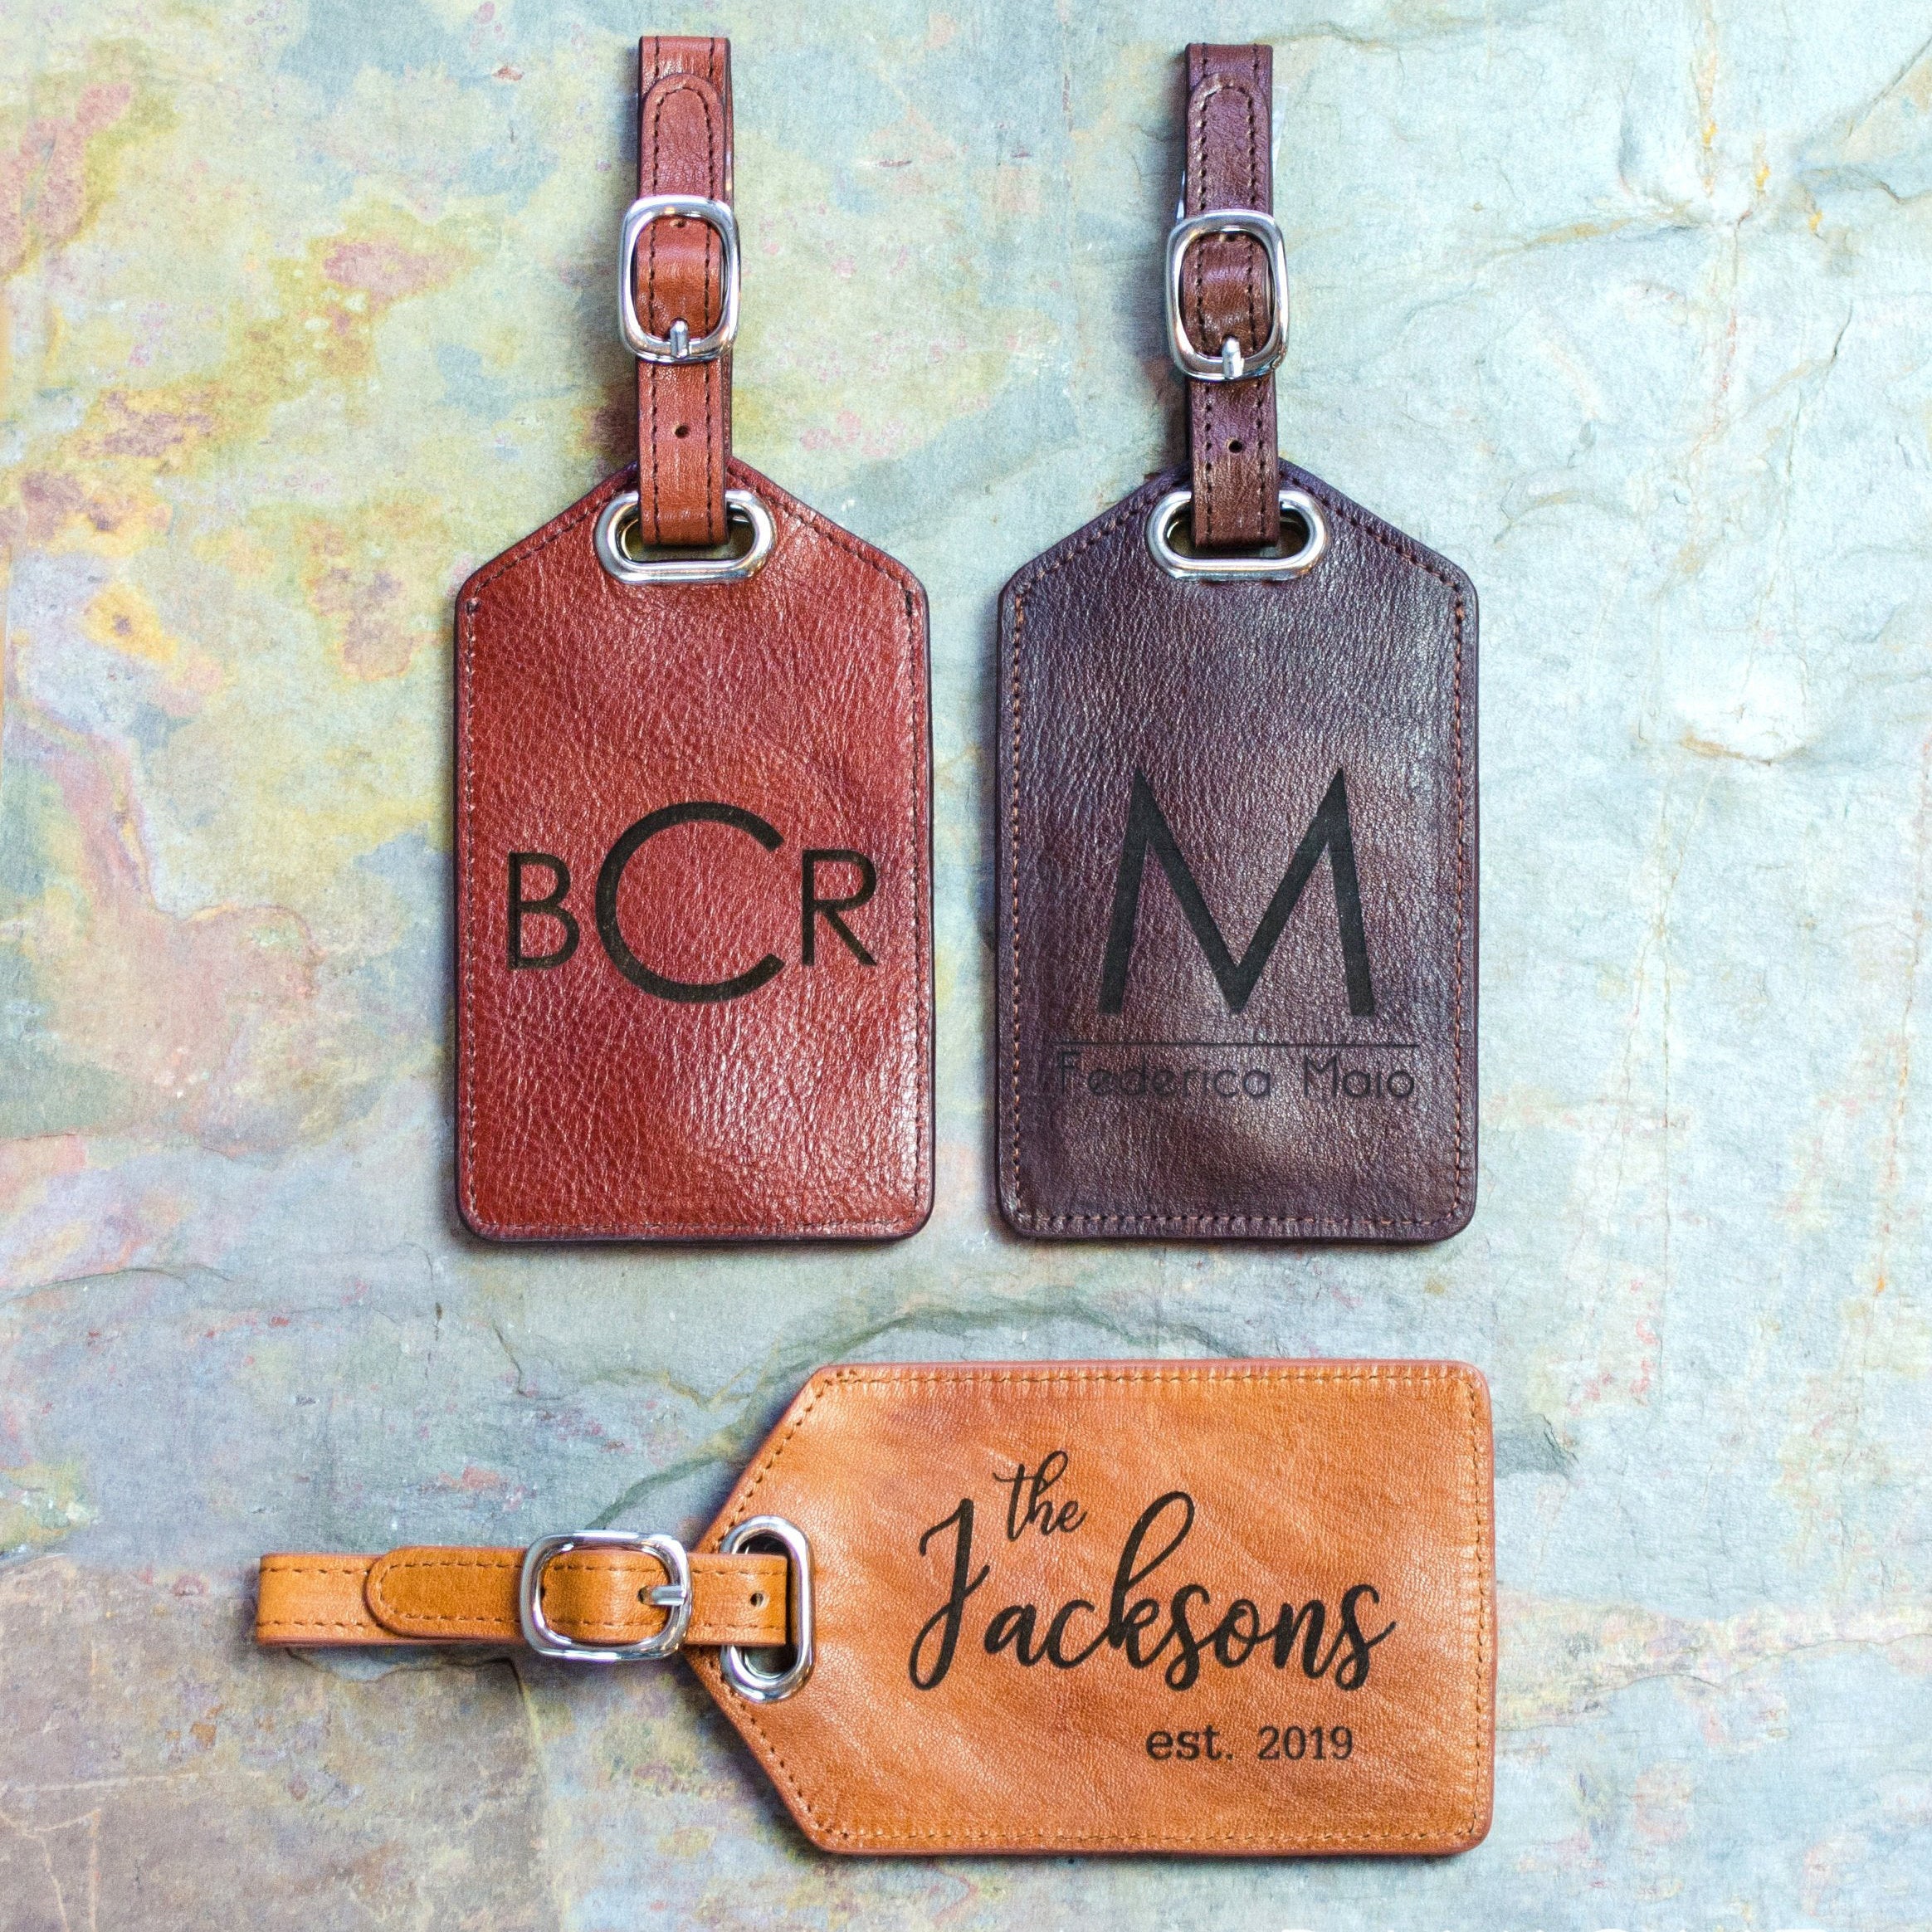 Personalized Luggage tag with Embroidery Text, Custom Luggage Tag